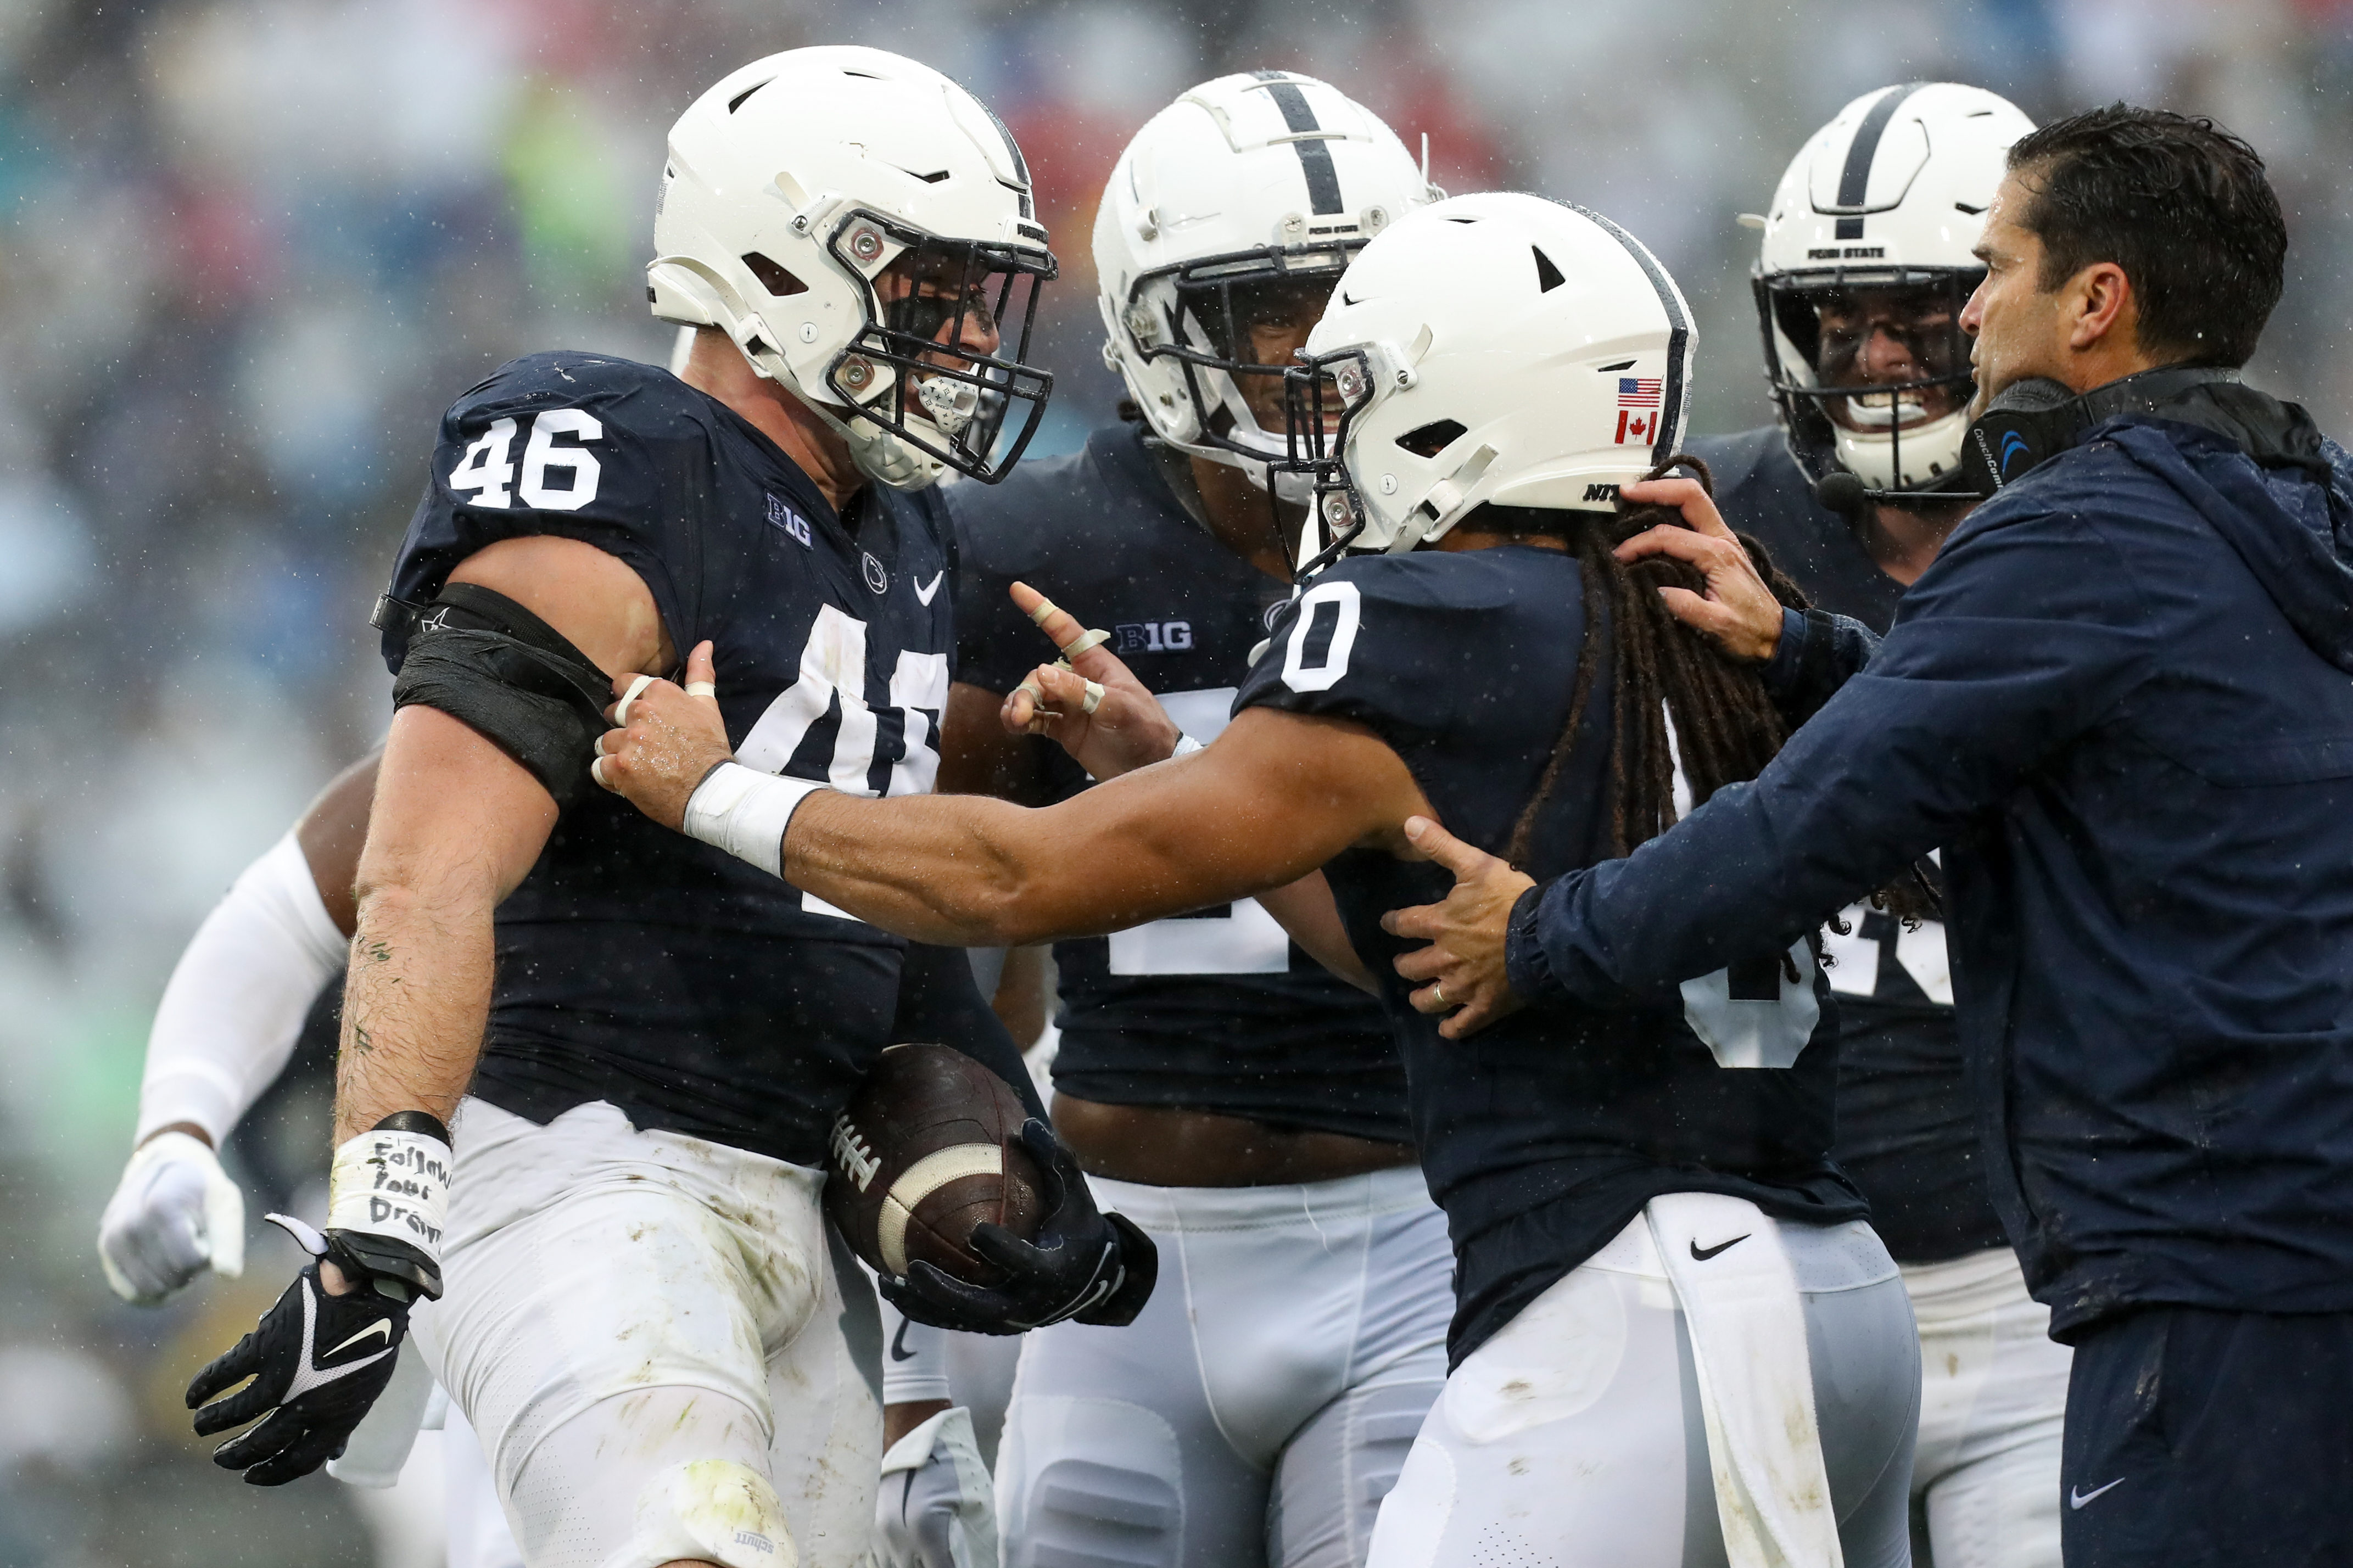 Analyst: Penn State Has the ‘Mindset’ Advantage Over Michigan